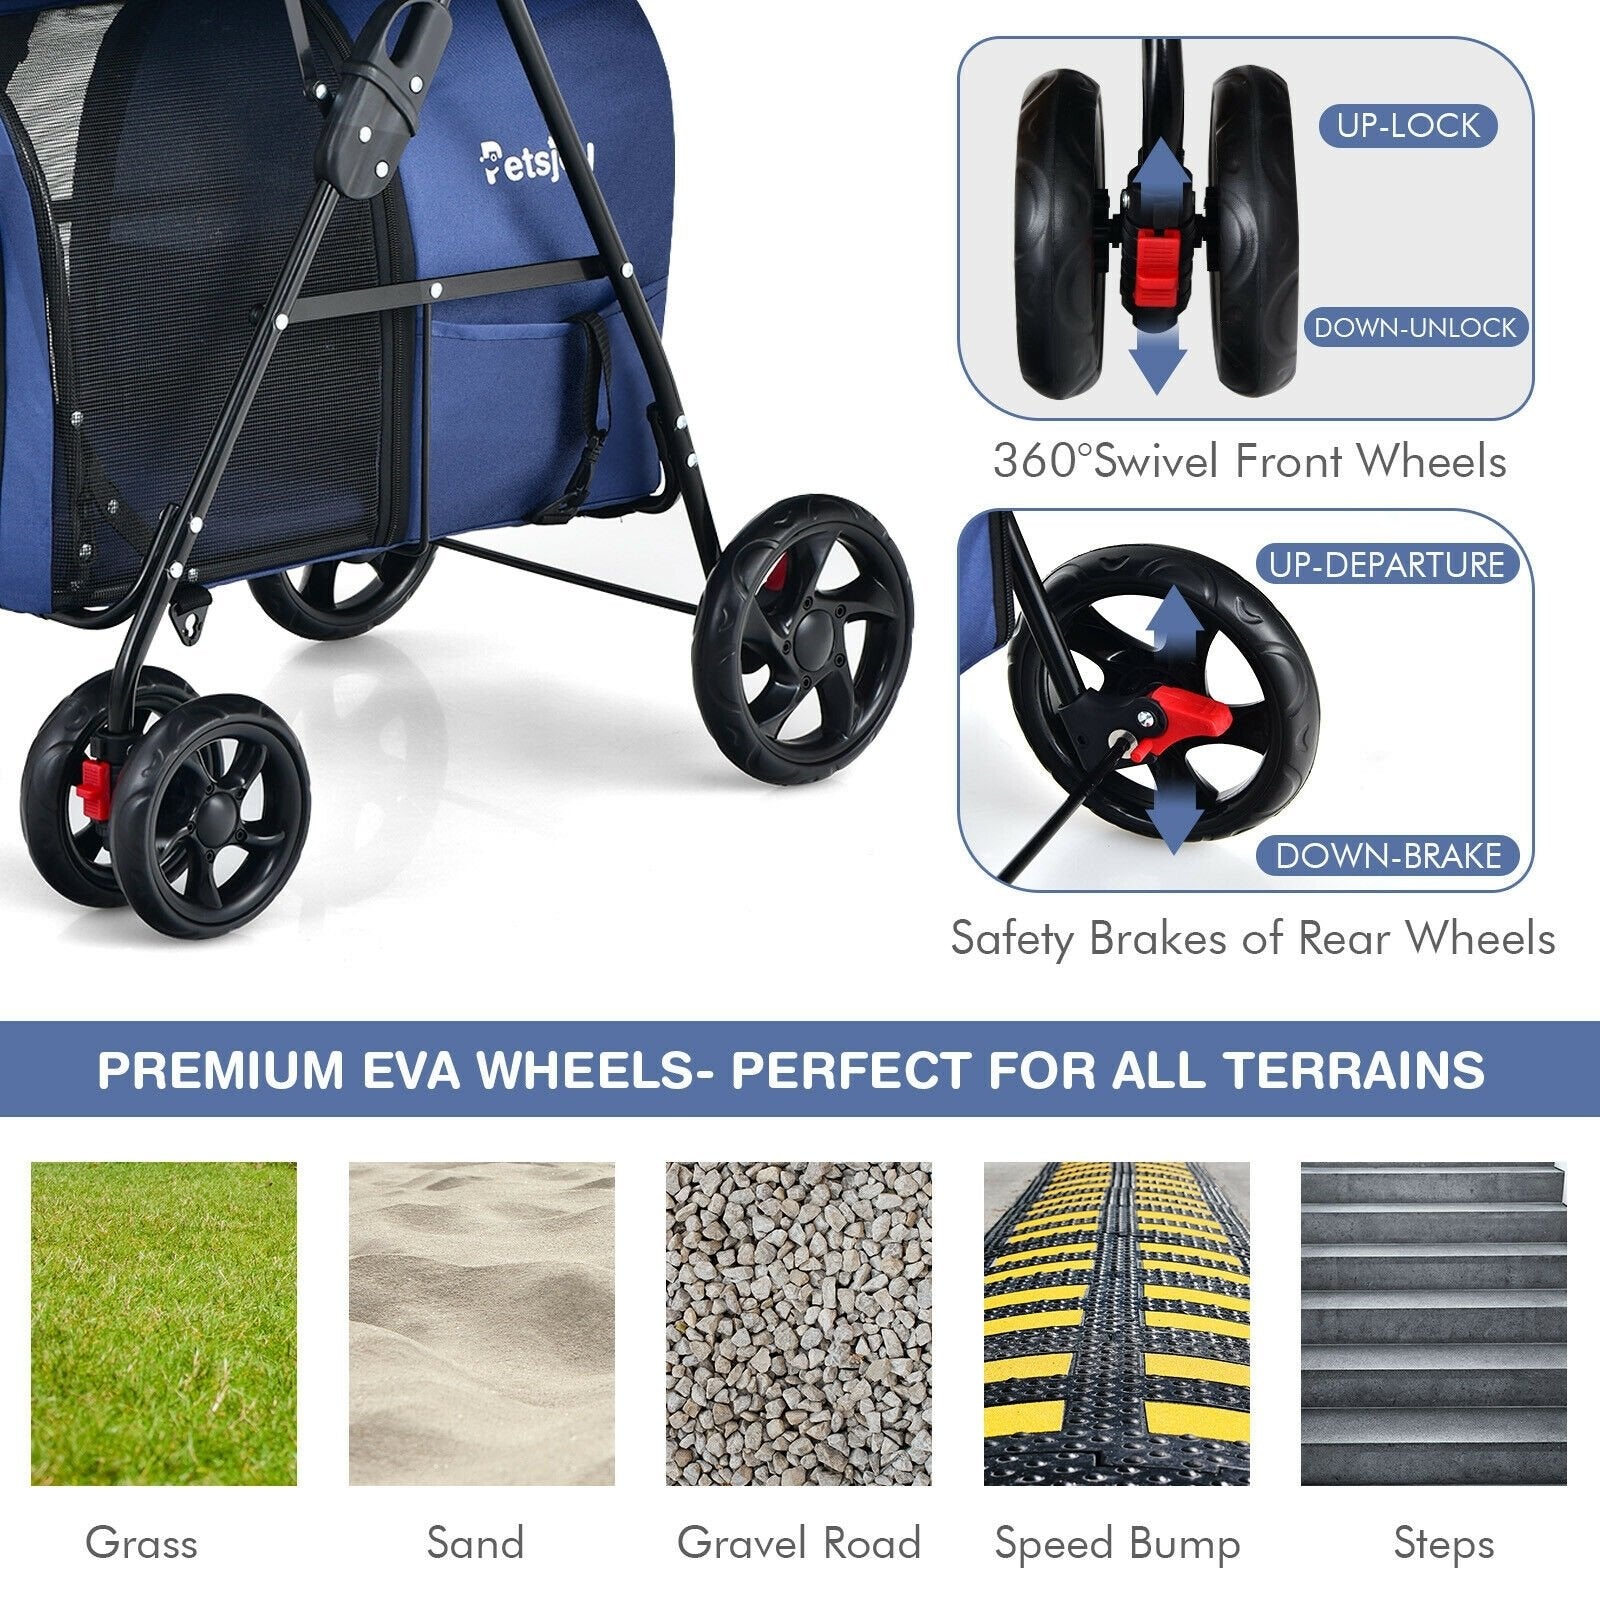 4-in-1 Double Pet Stroller with Detachable Carrier and Travel Carriage, Blue at Gallery Canada